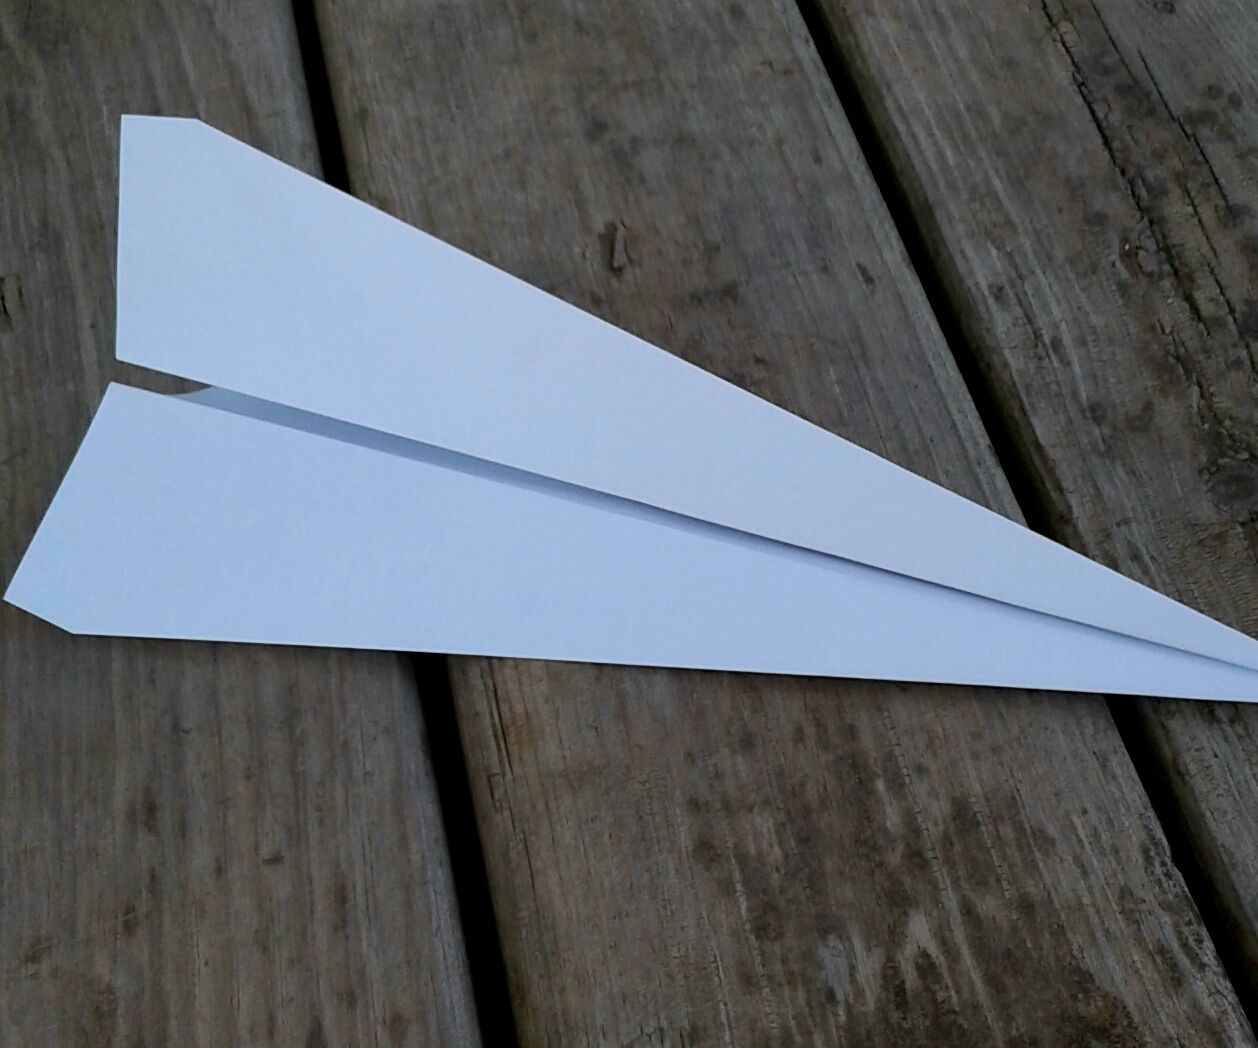 The Simplest Paper Airplane